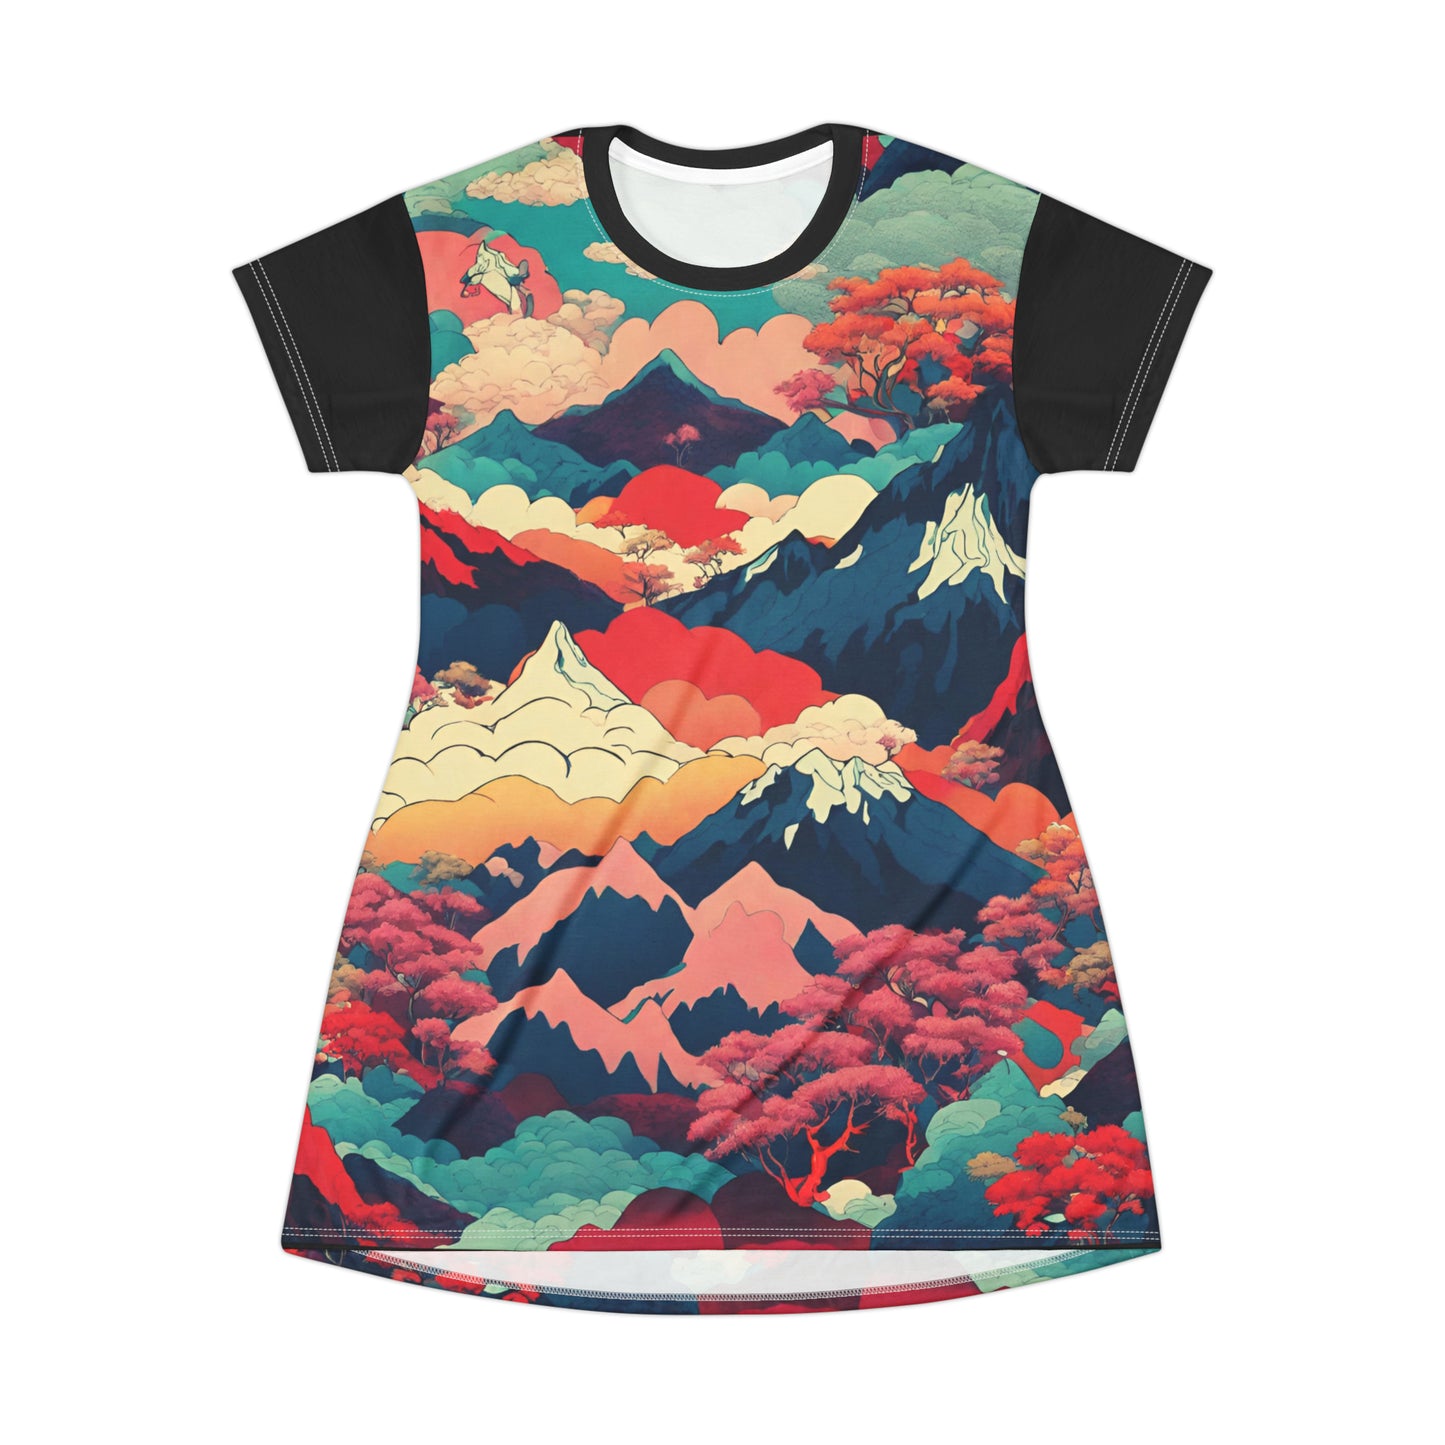 Candy-colored Mountains T-Shirt Dress